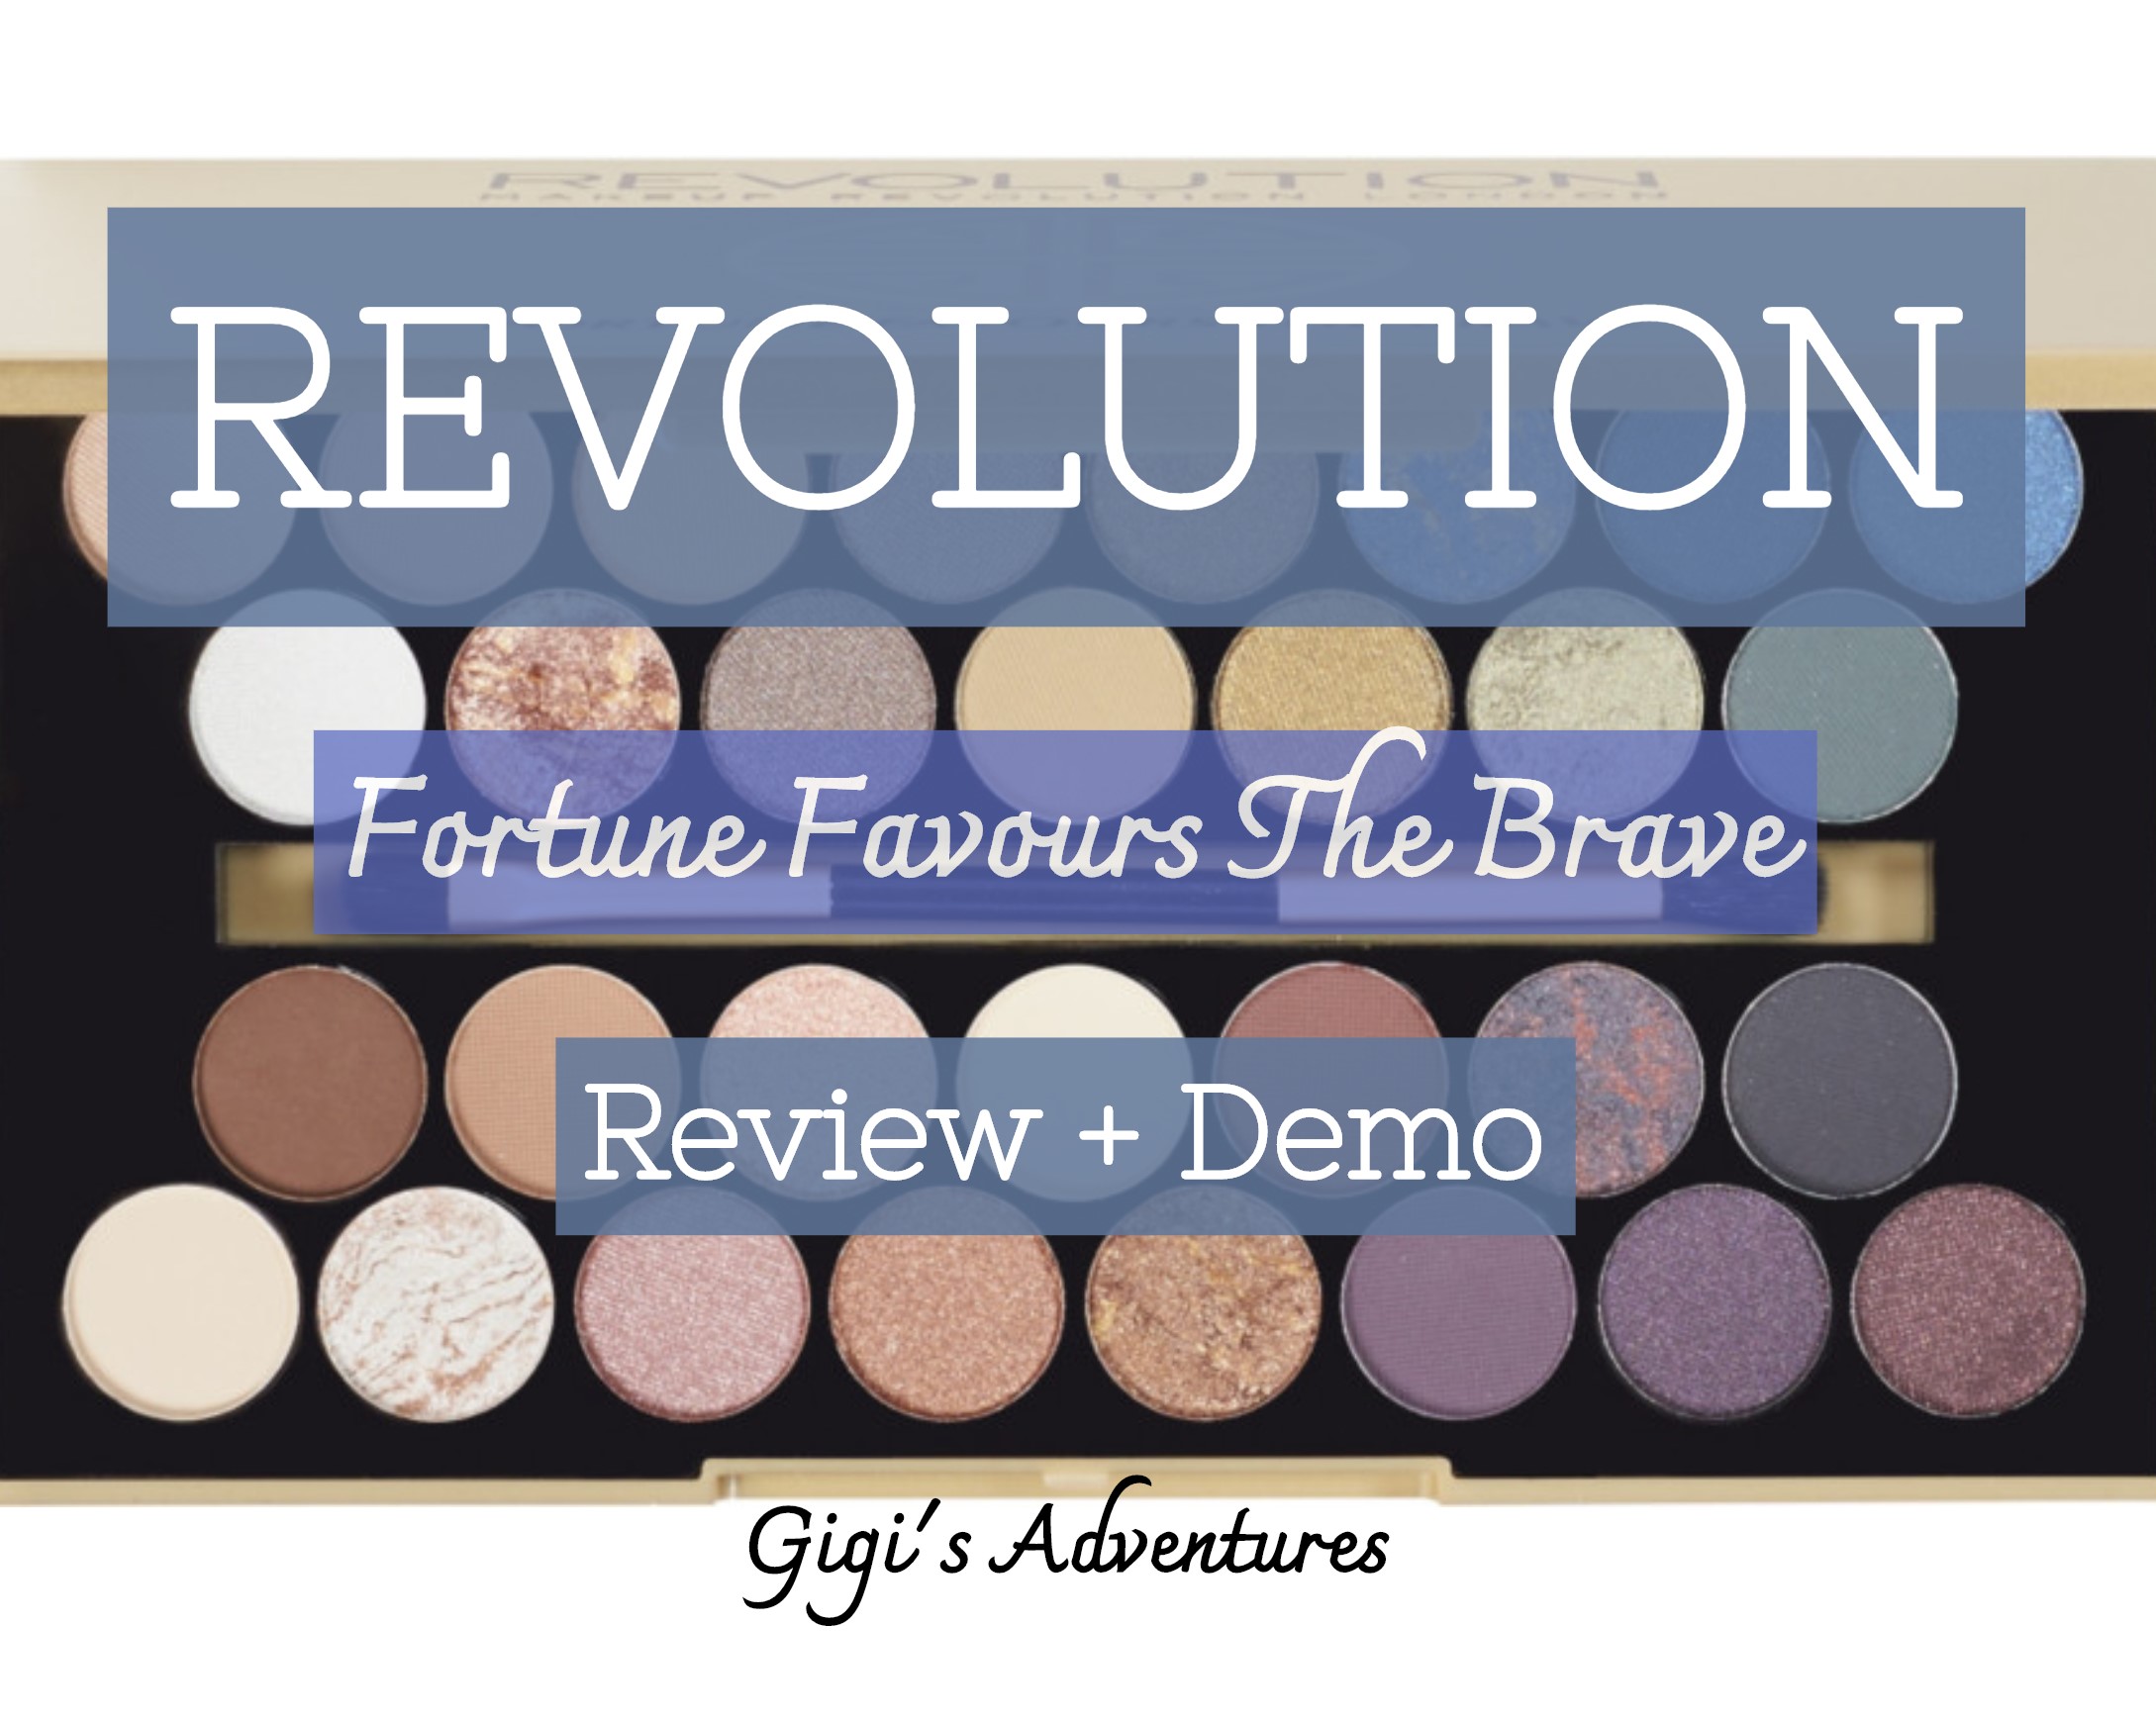 Revisiting Revolution Fortune Favours The Brave Palette | Review + Demo